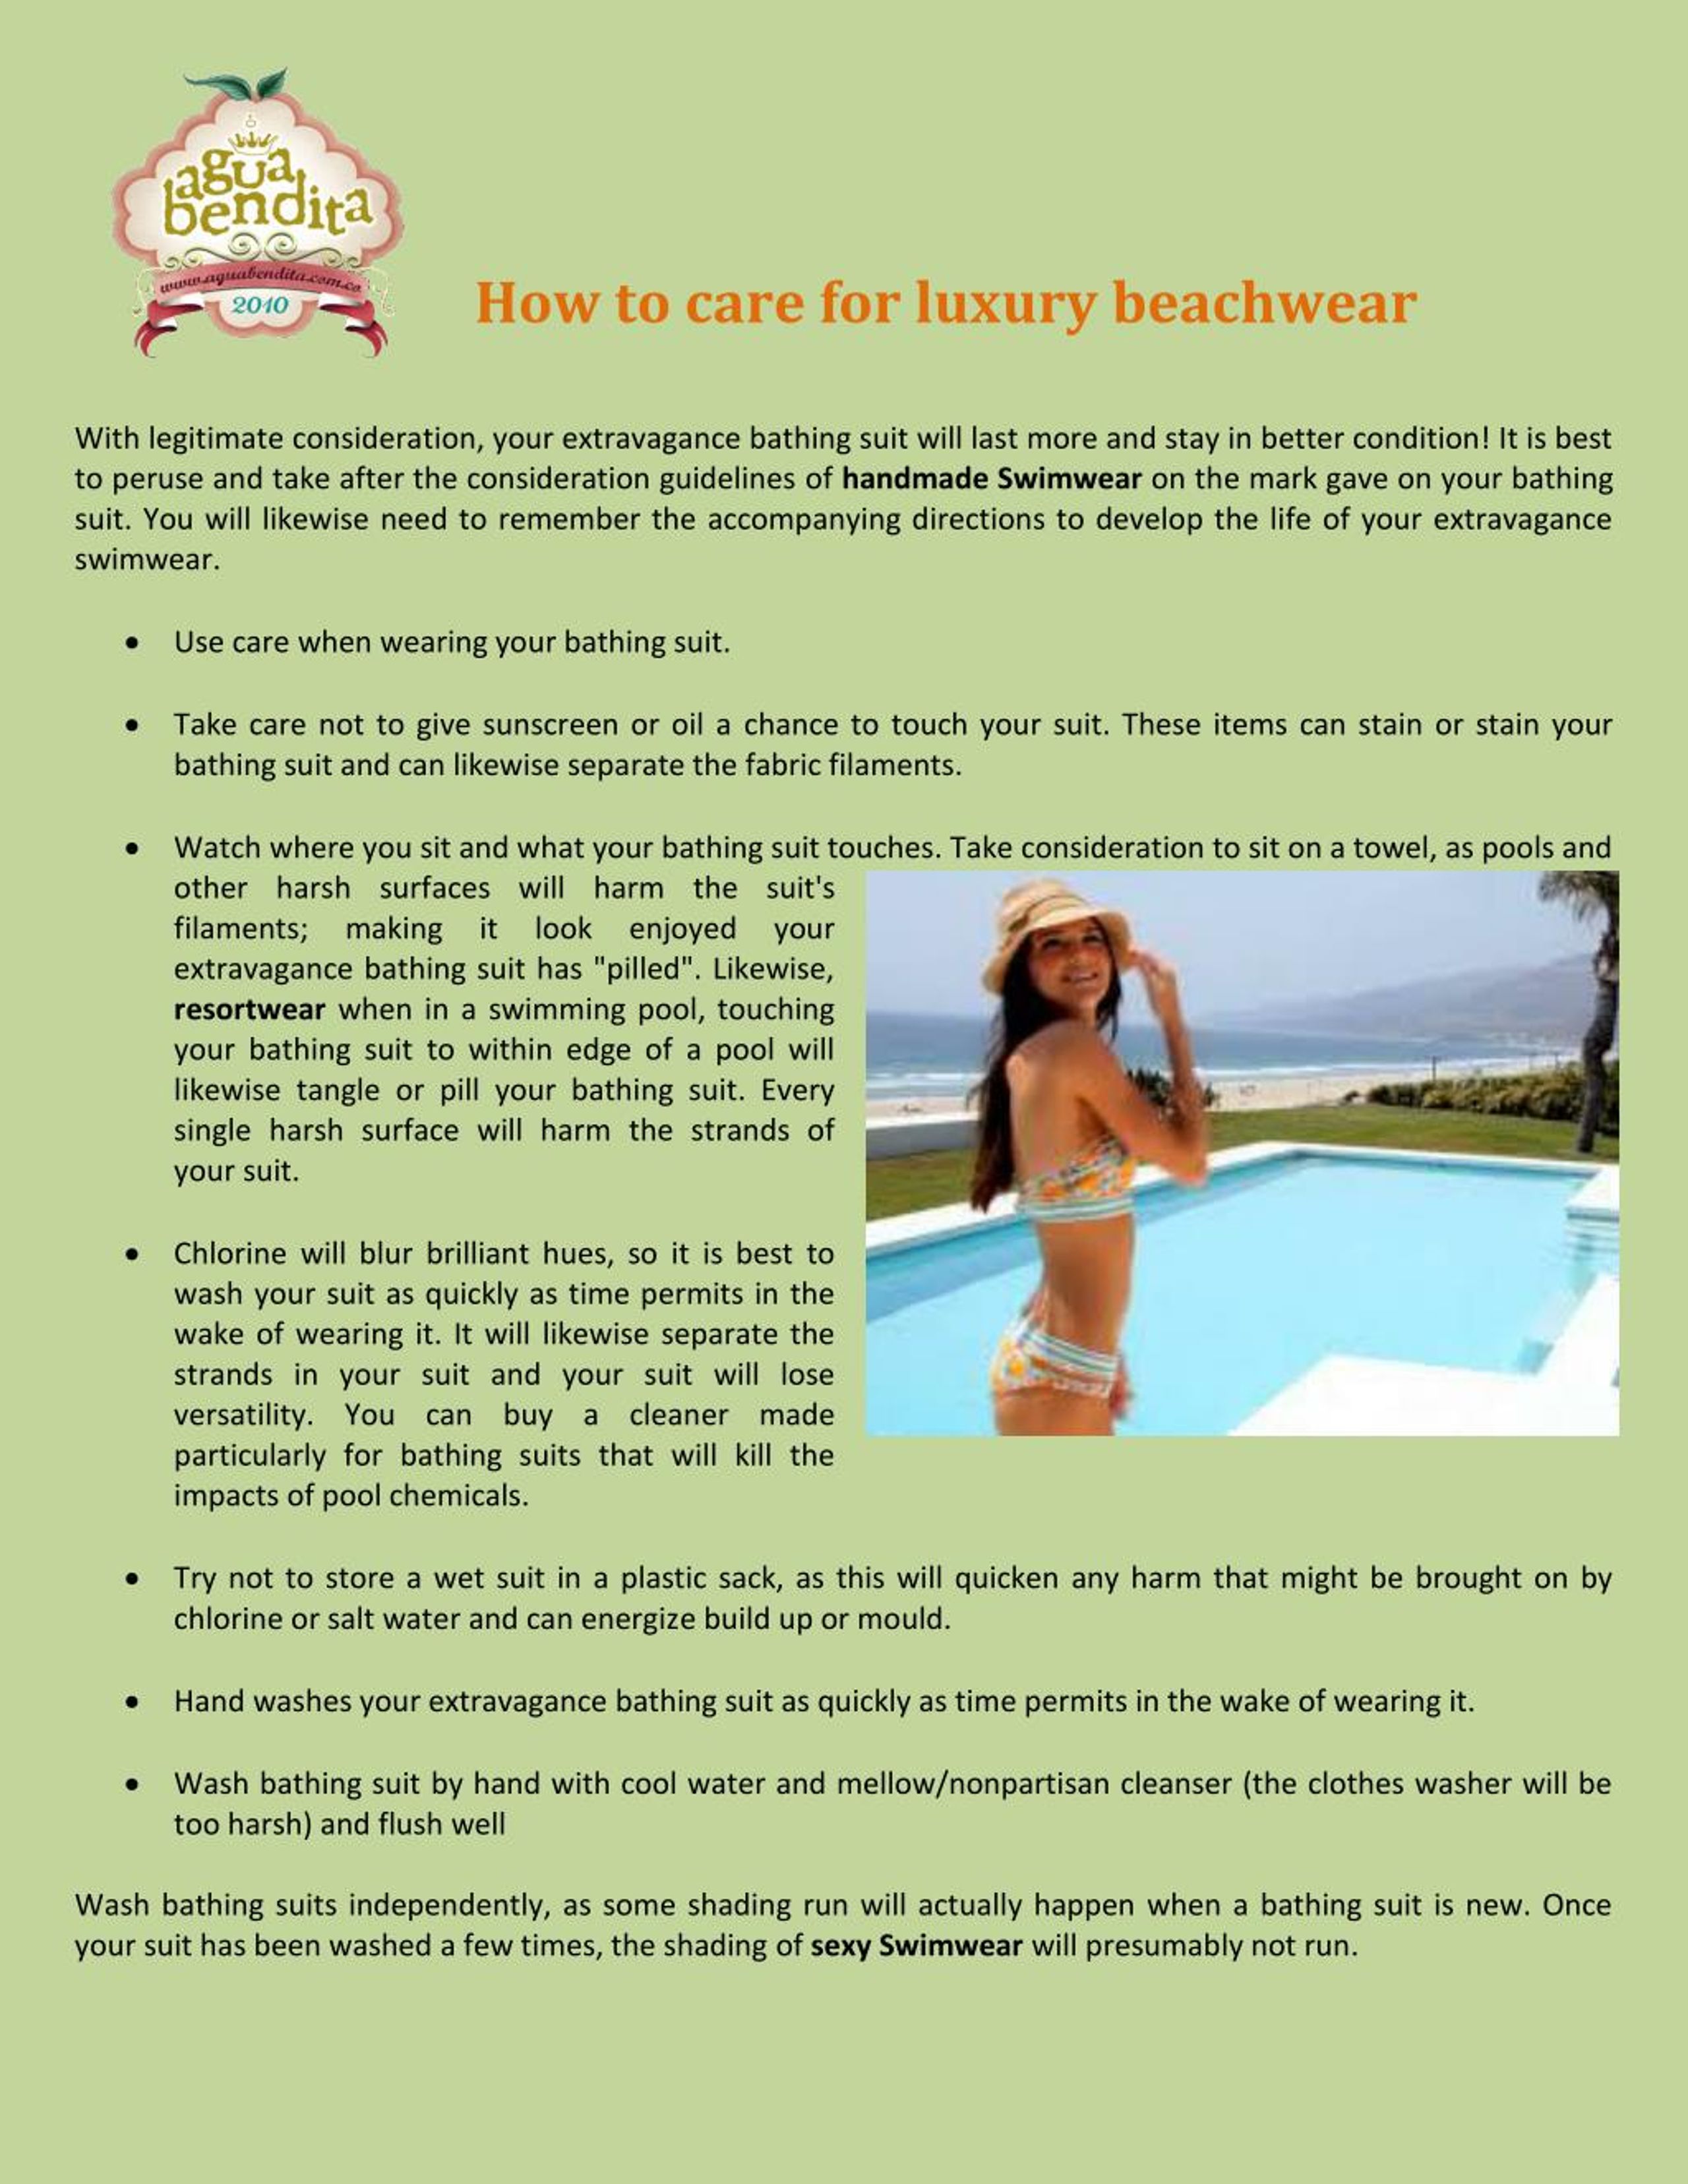 How to Wash Bathing Suits to Keep Them Looking Their Best